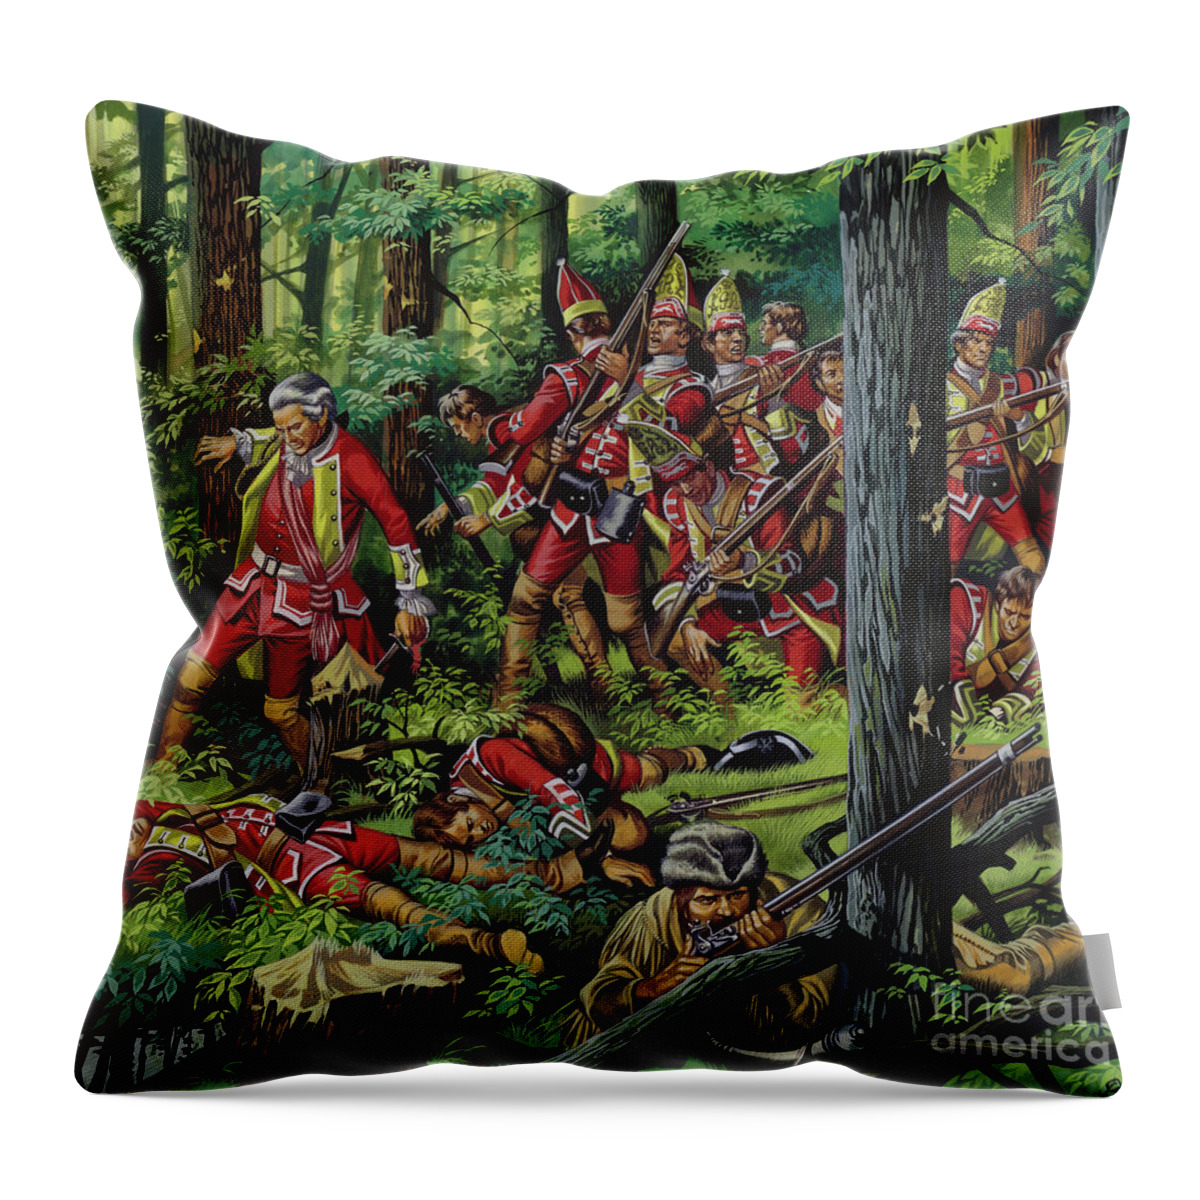 Braddock Expedition Throw Pillow featuring the painting The Braddock Massacre by Ron Embleton